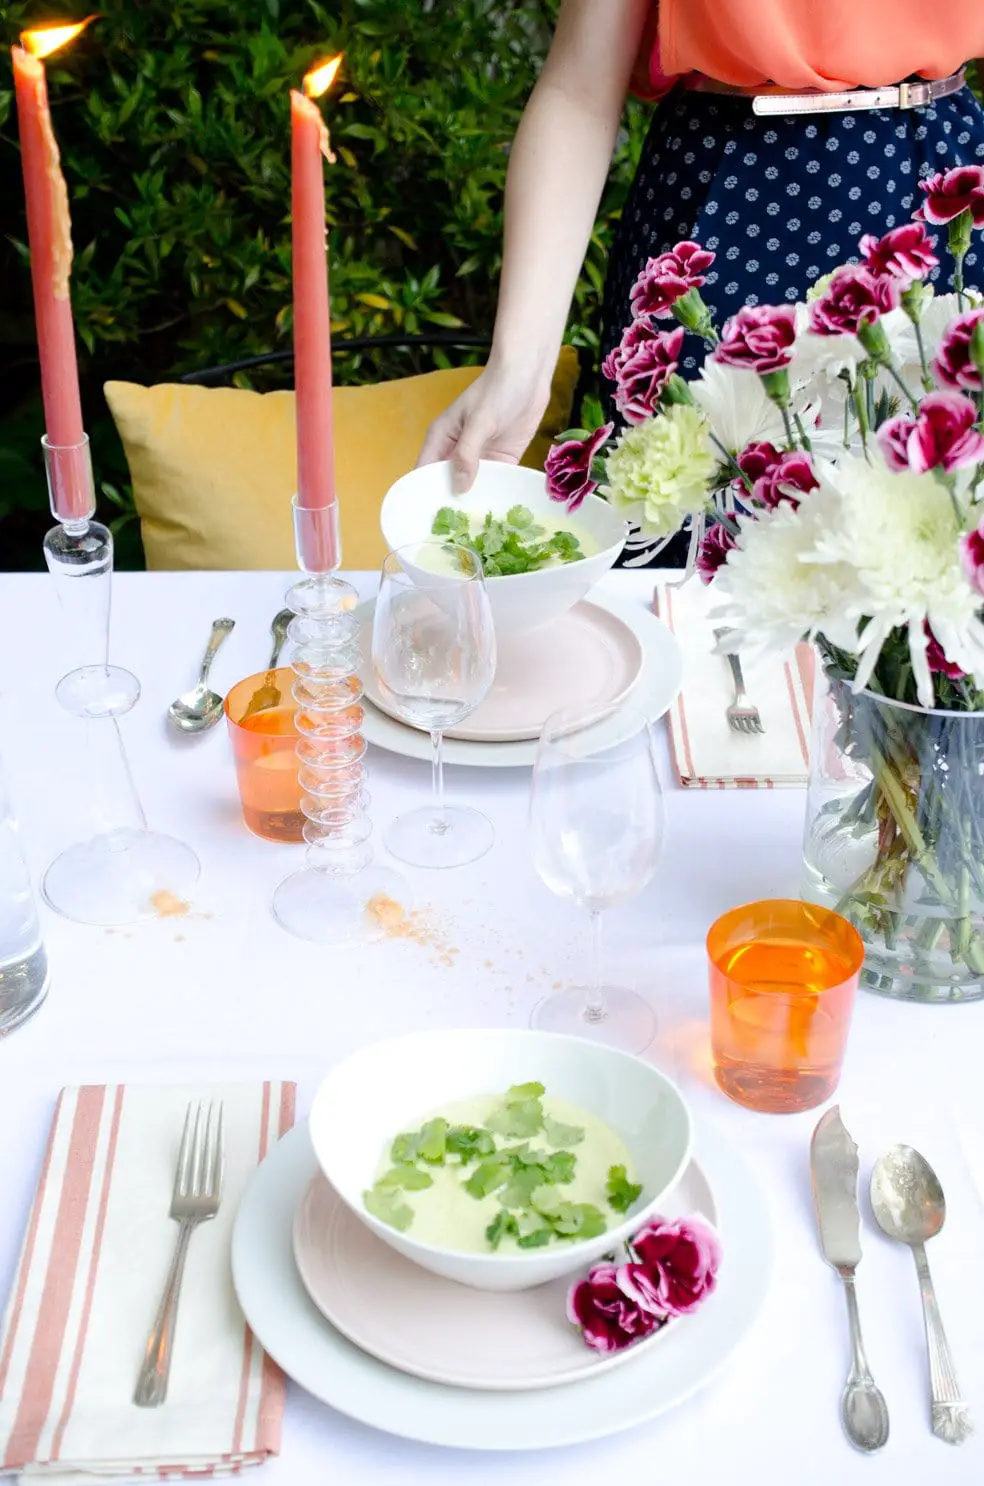 Brighten up your Cinco de Mayo tabletop with pops of orange, yellow and blush, and bring in colored water glasses and striped napkins for some pizazz.